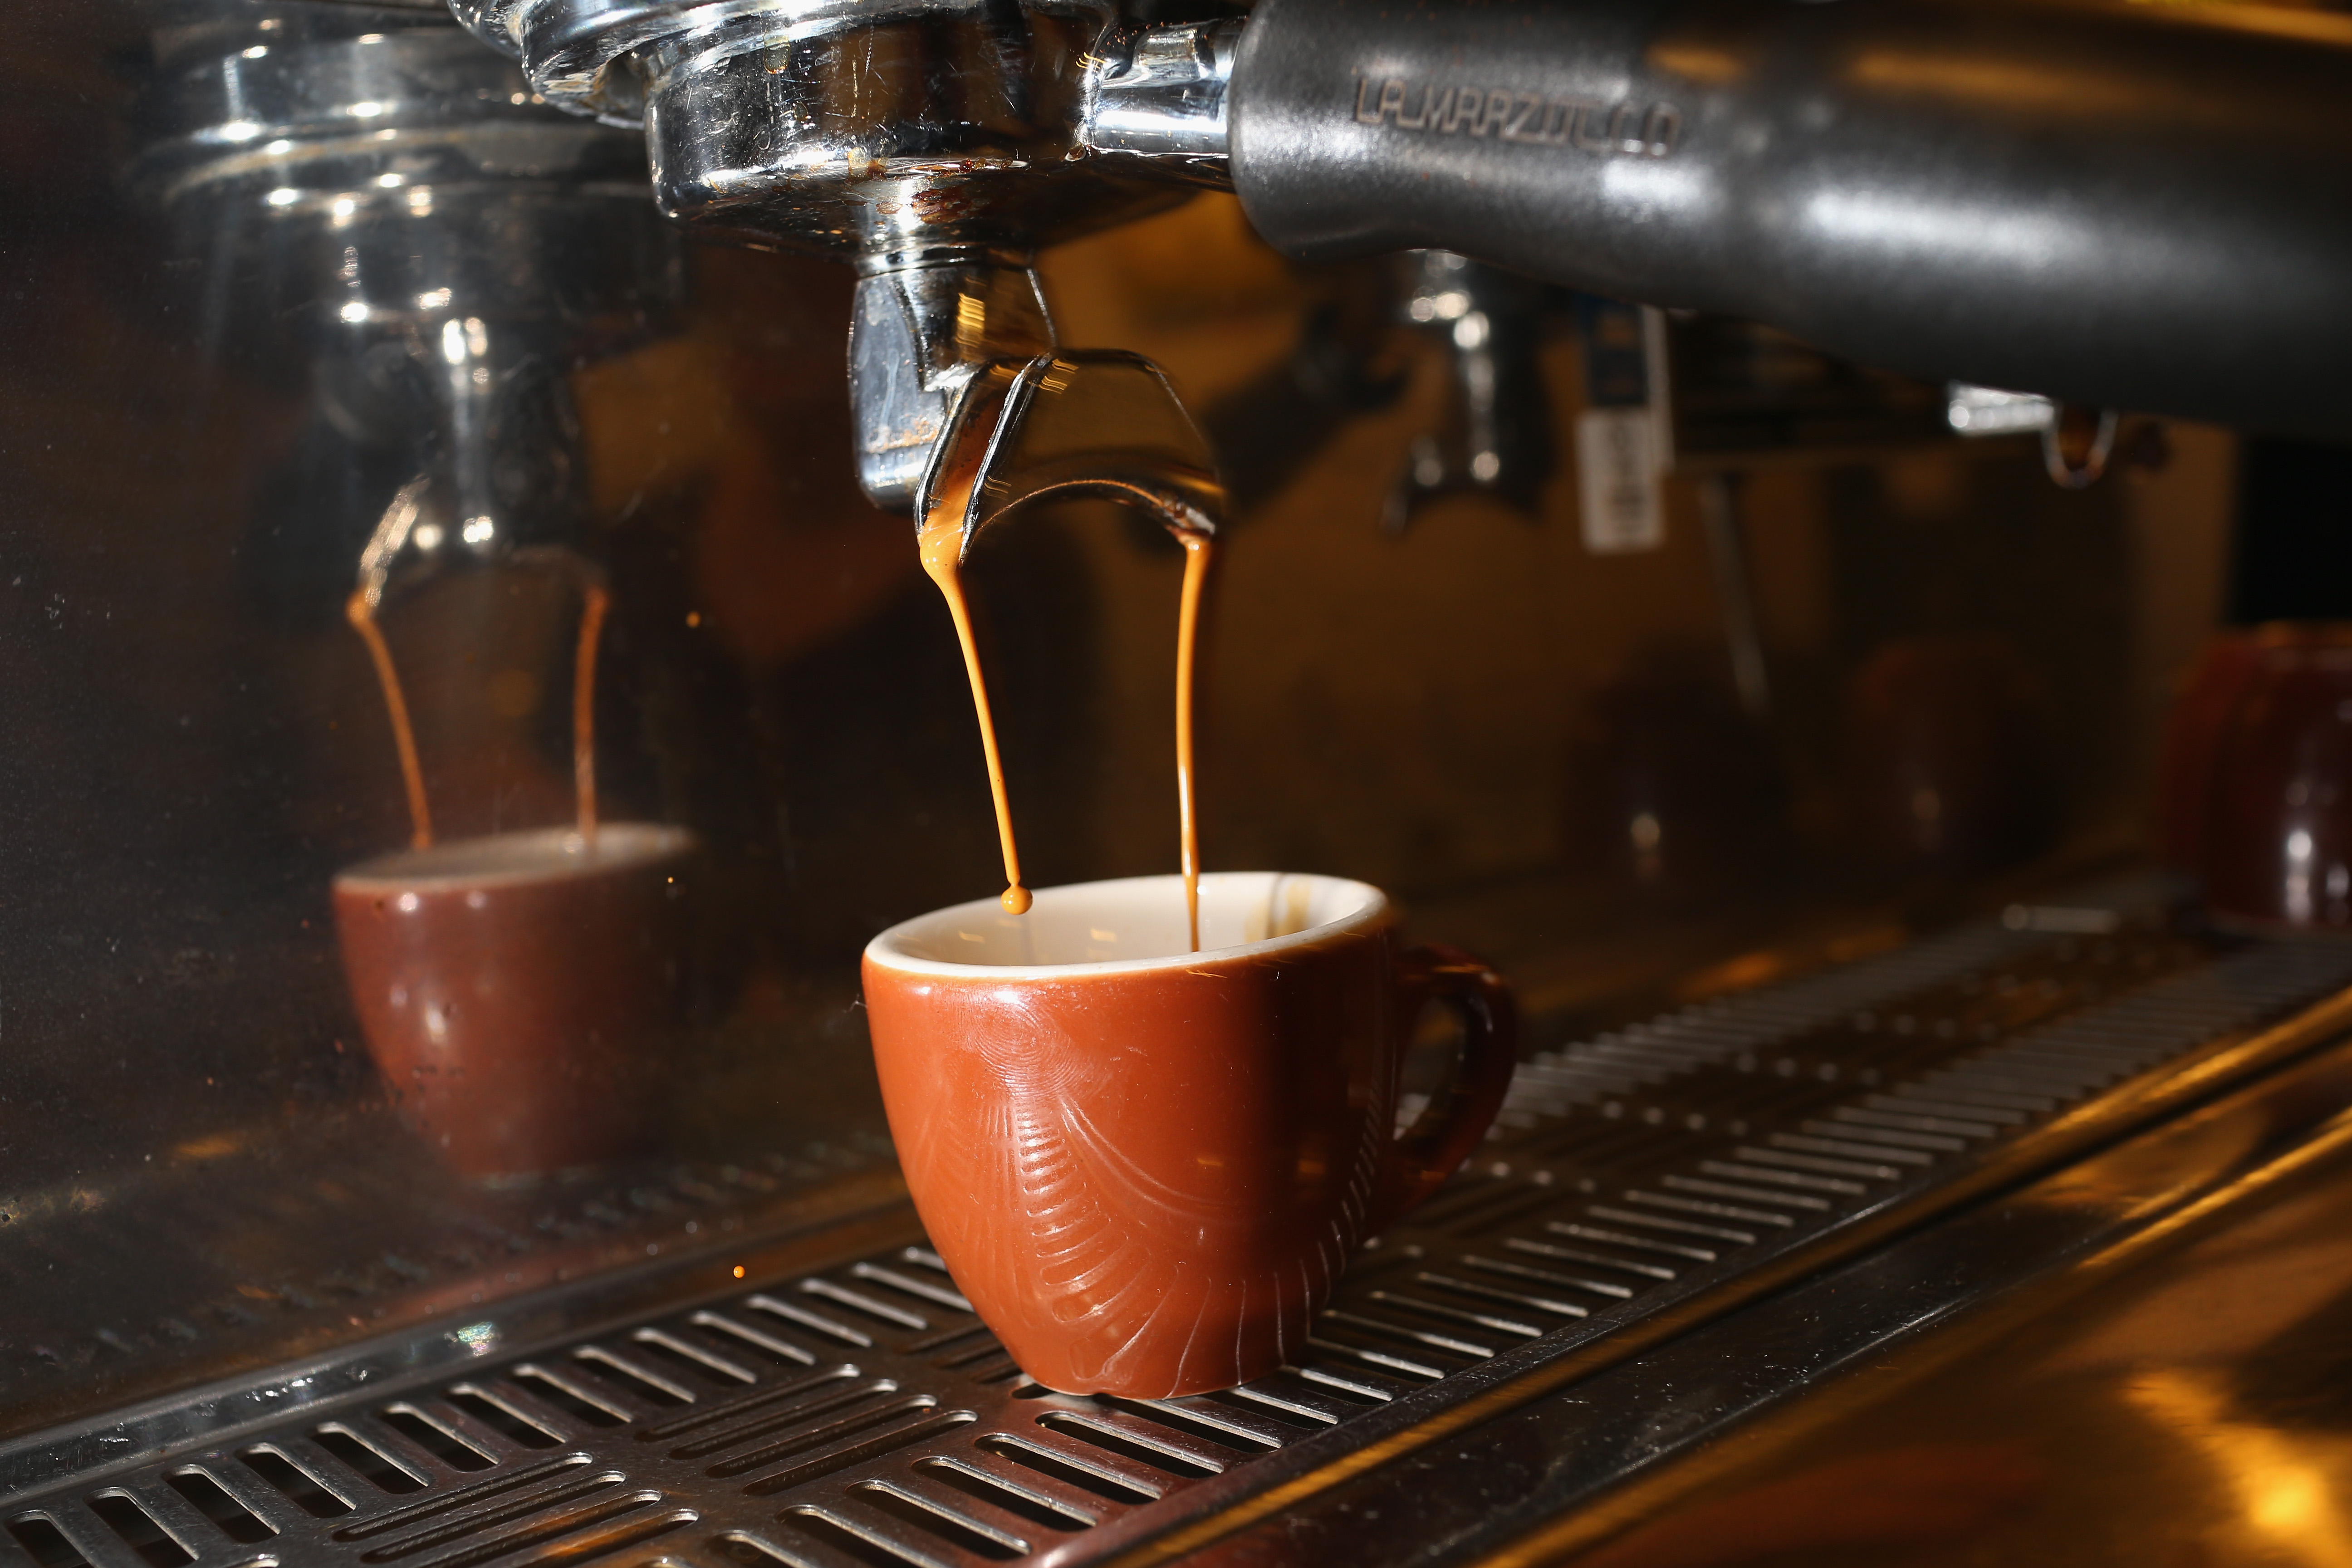 Here's where you can get free coffee on National Coffee Day